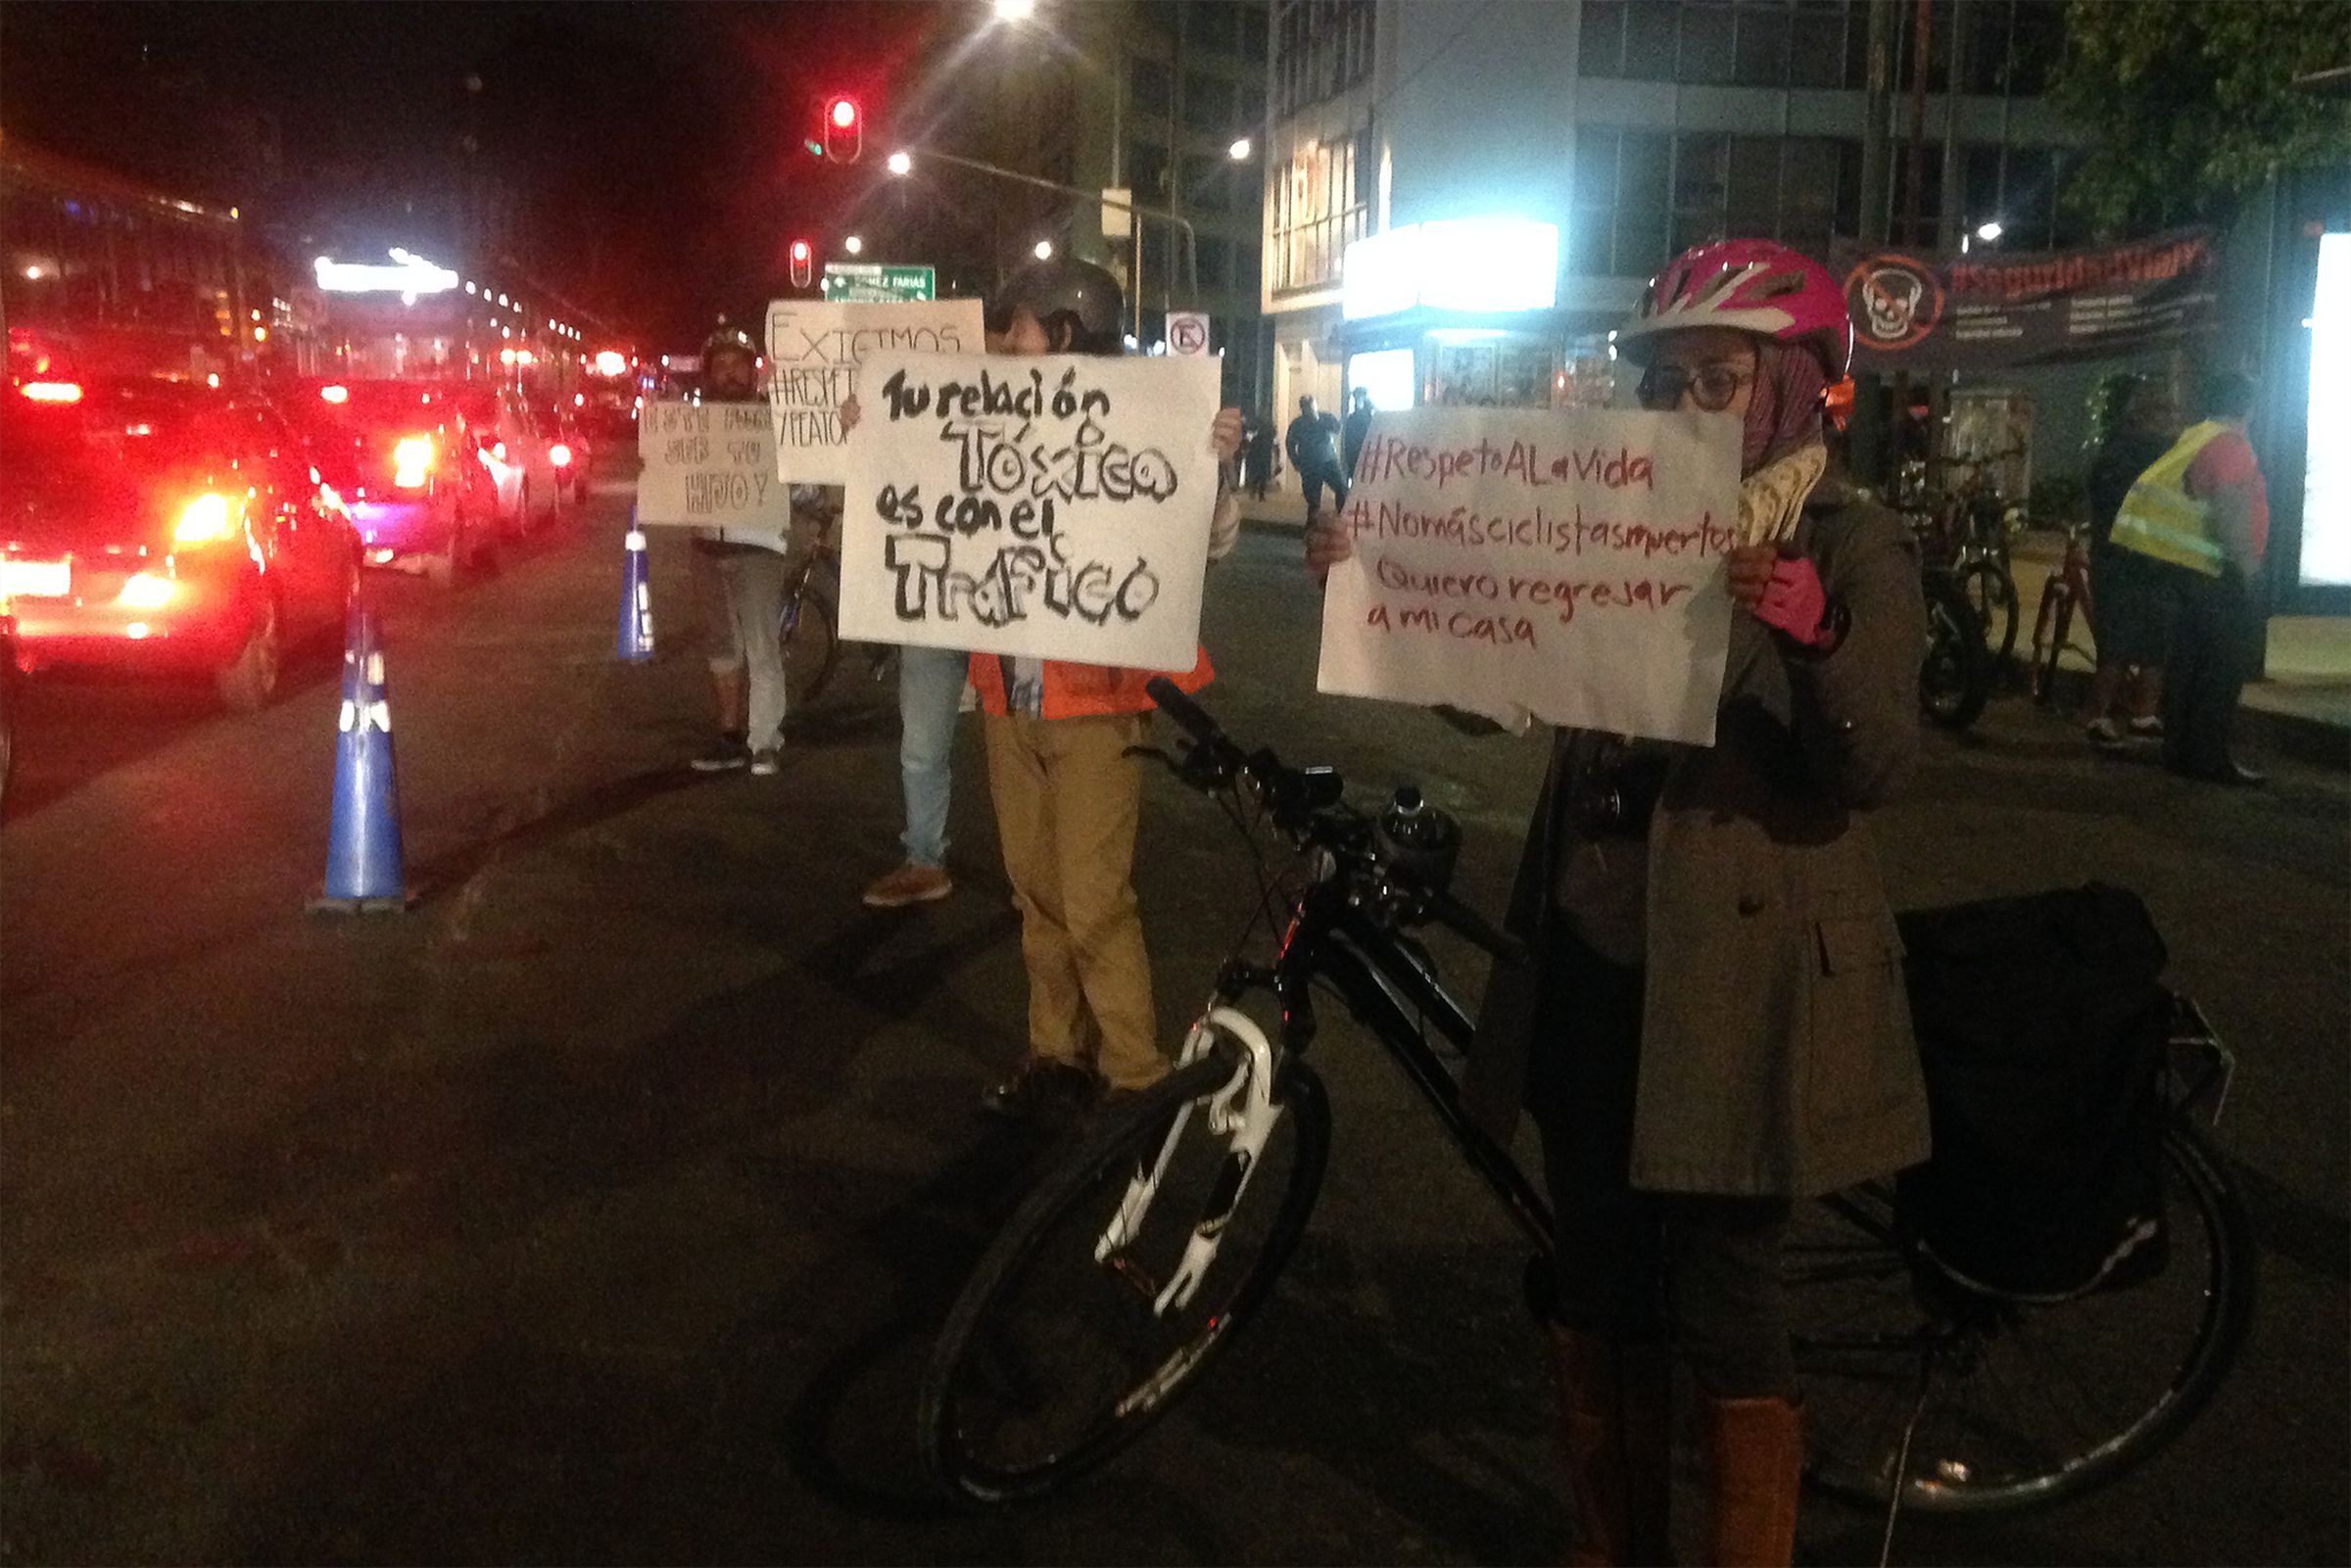 Protestors call for drivers to respect cyclists.